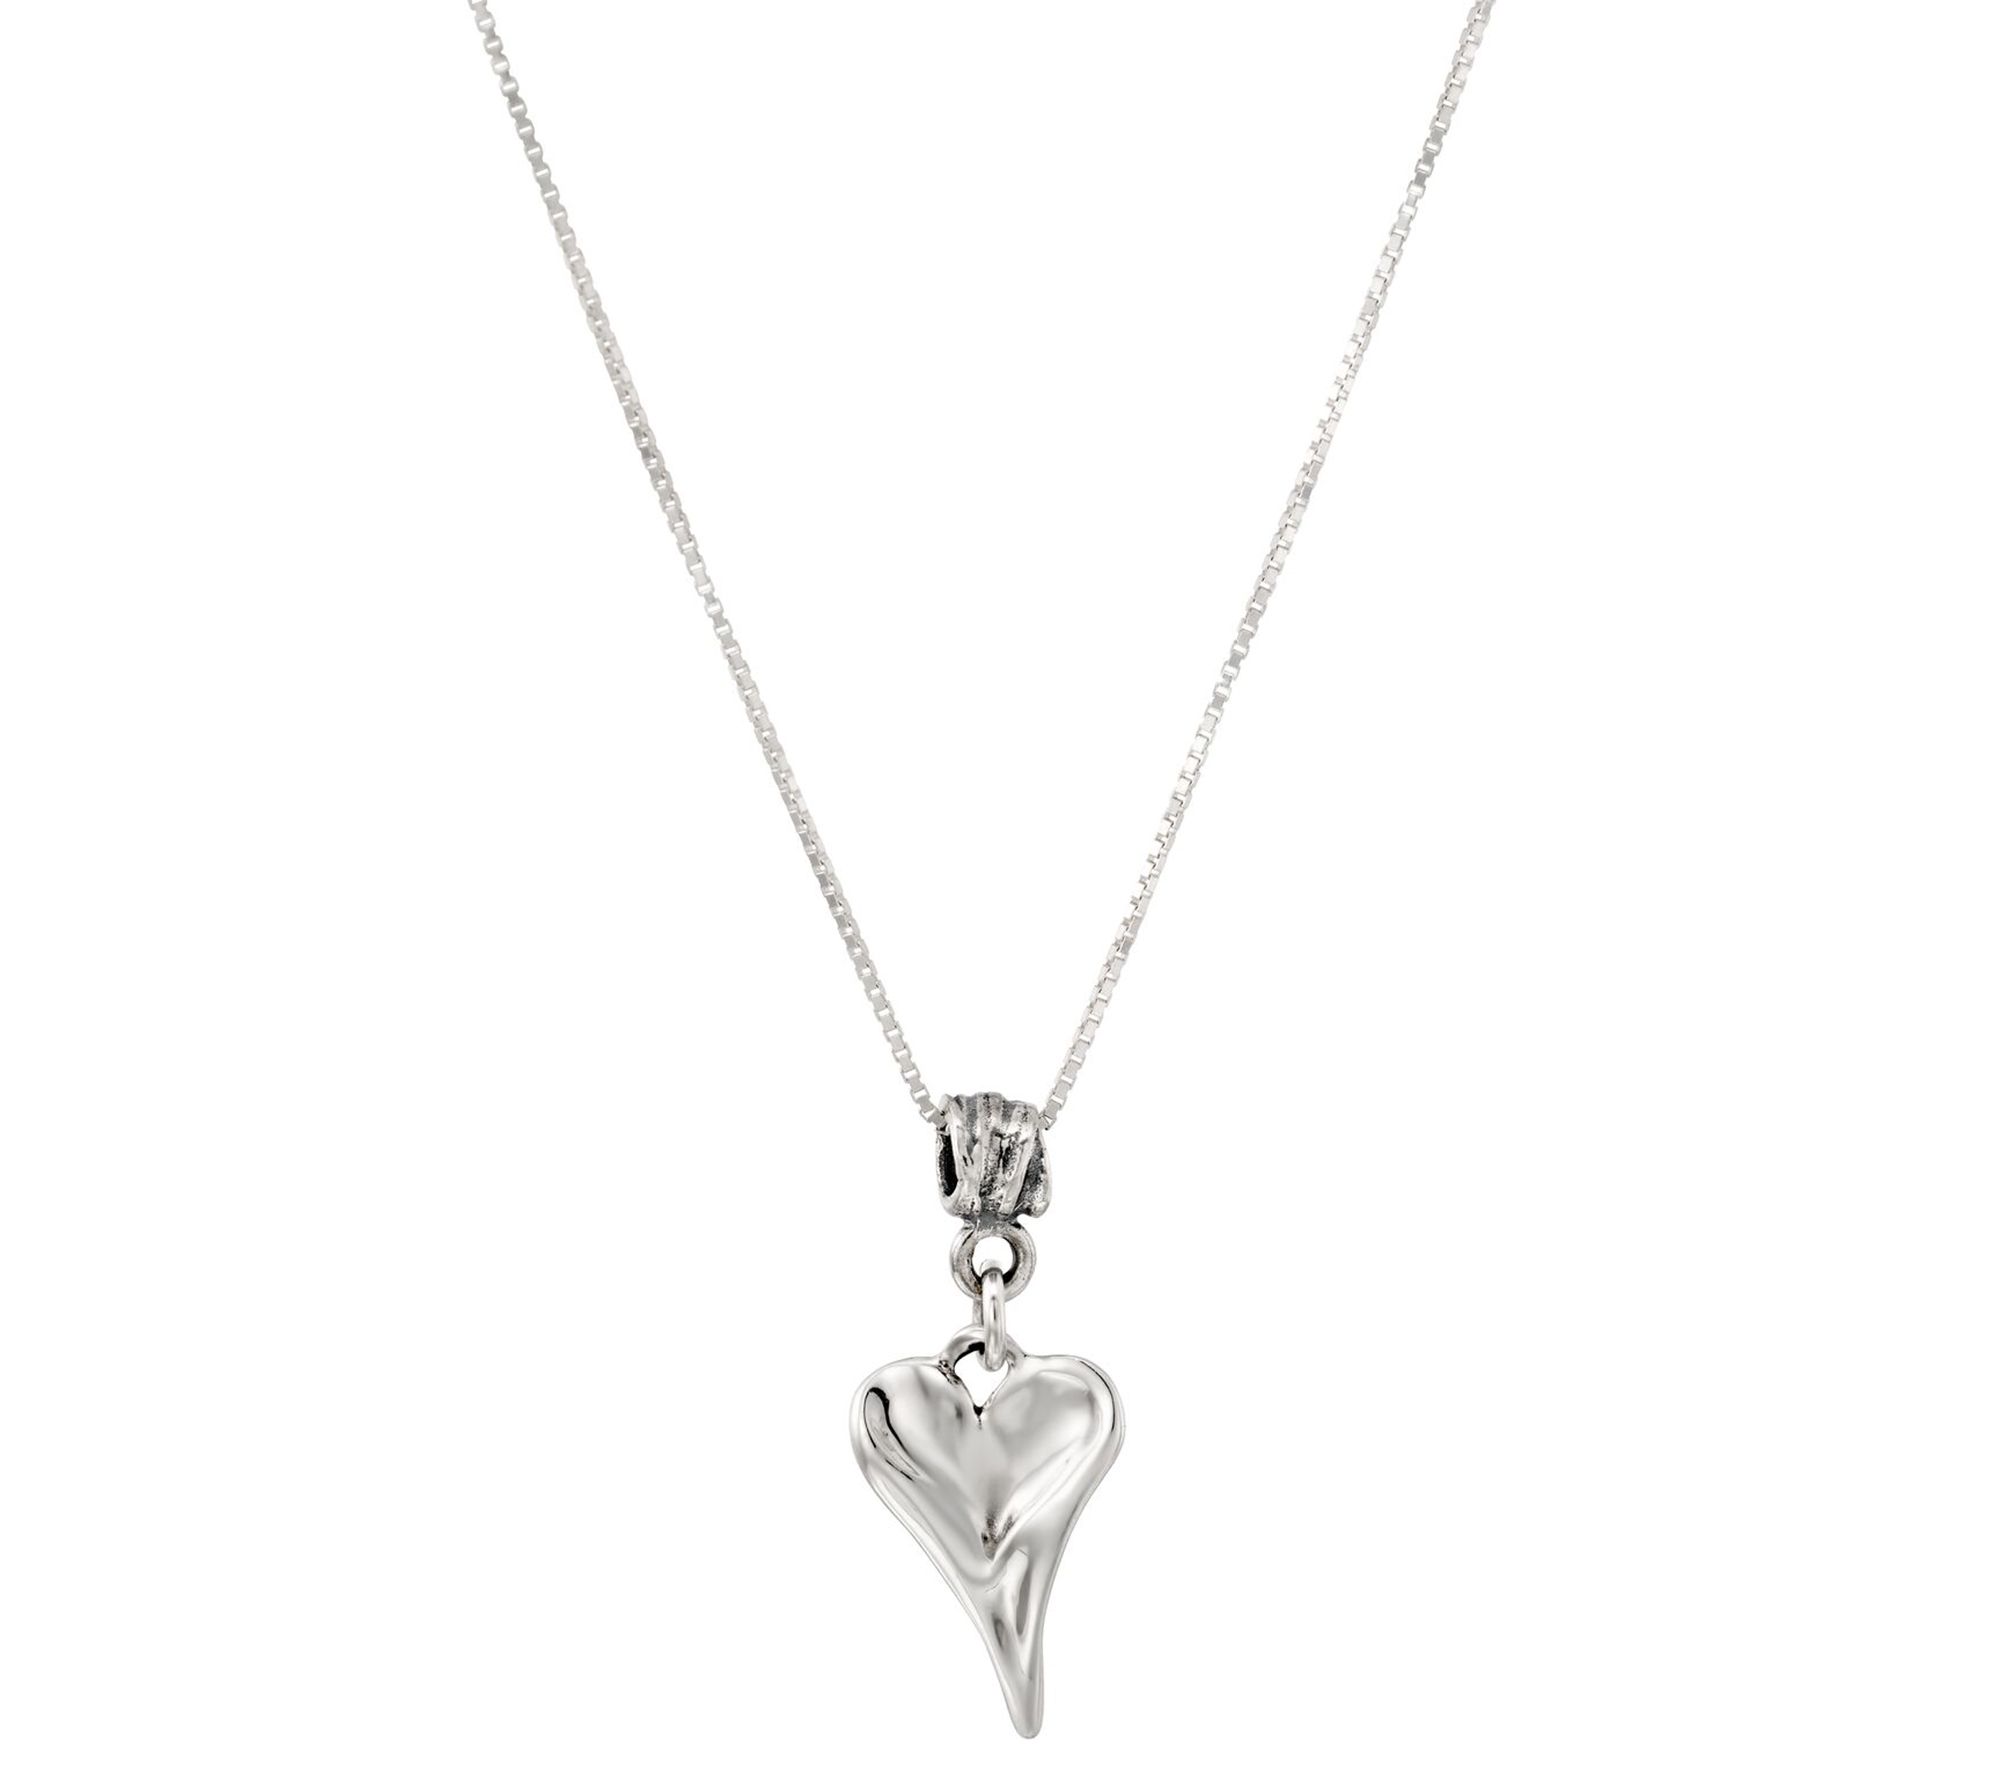 Hagit Sterling Silver Heart Pendant with Chain - QVC.com